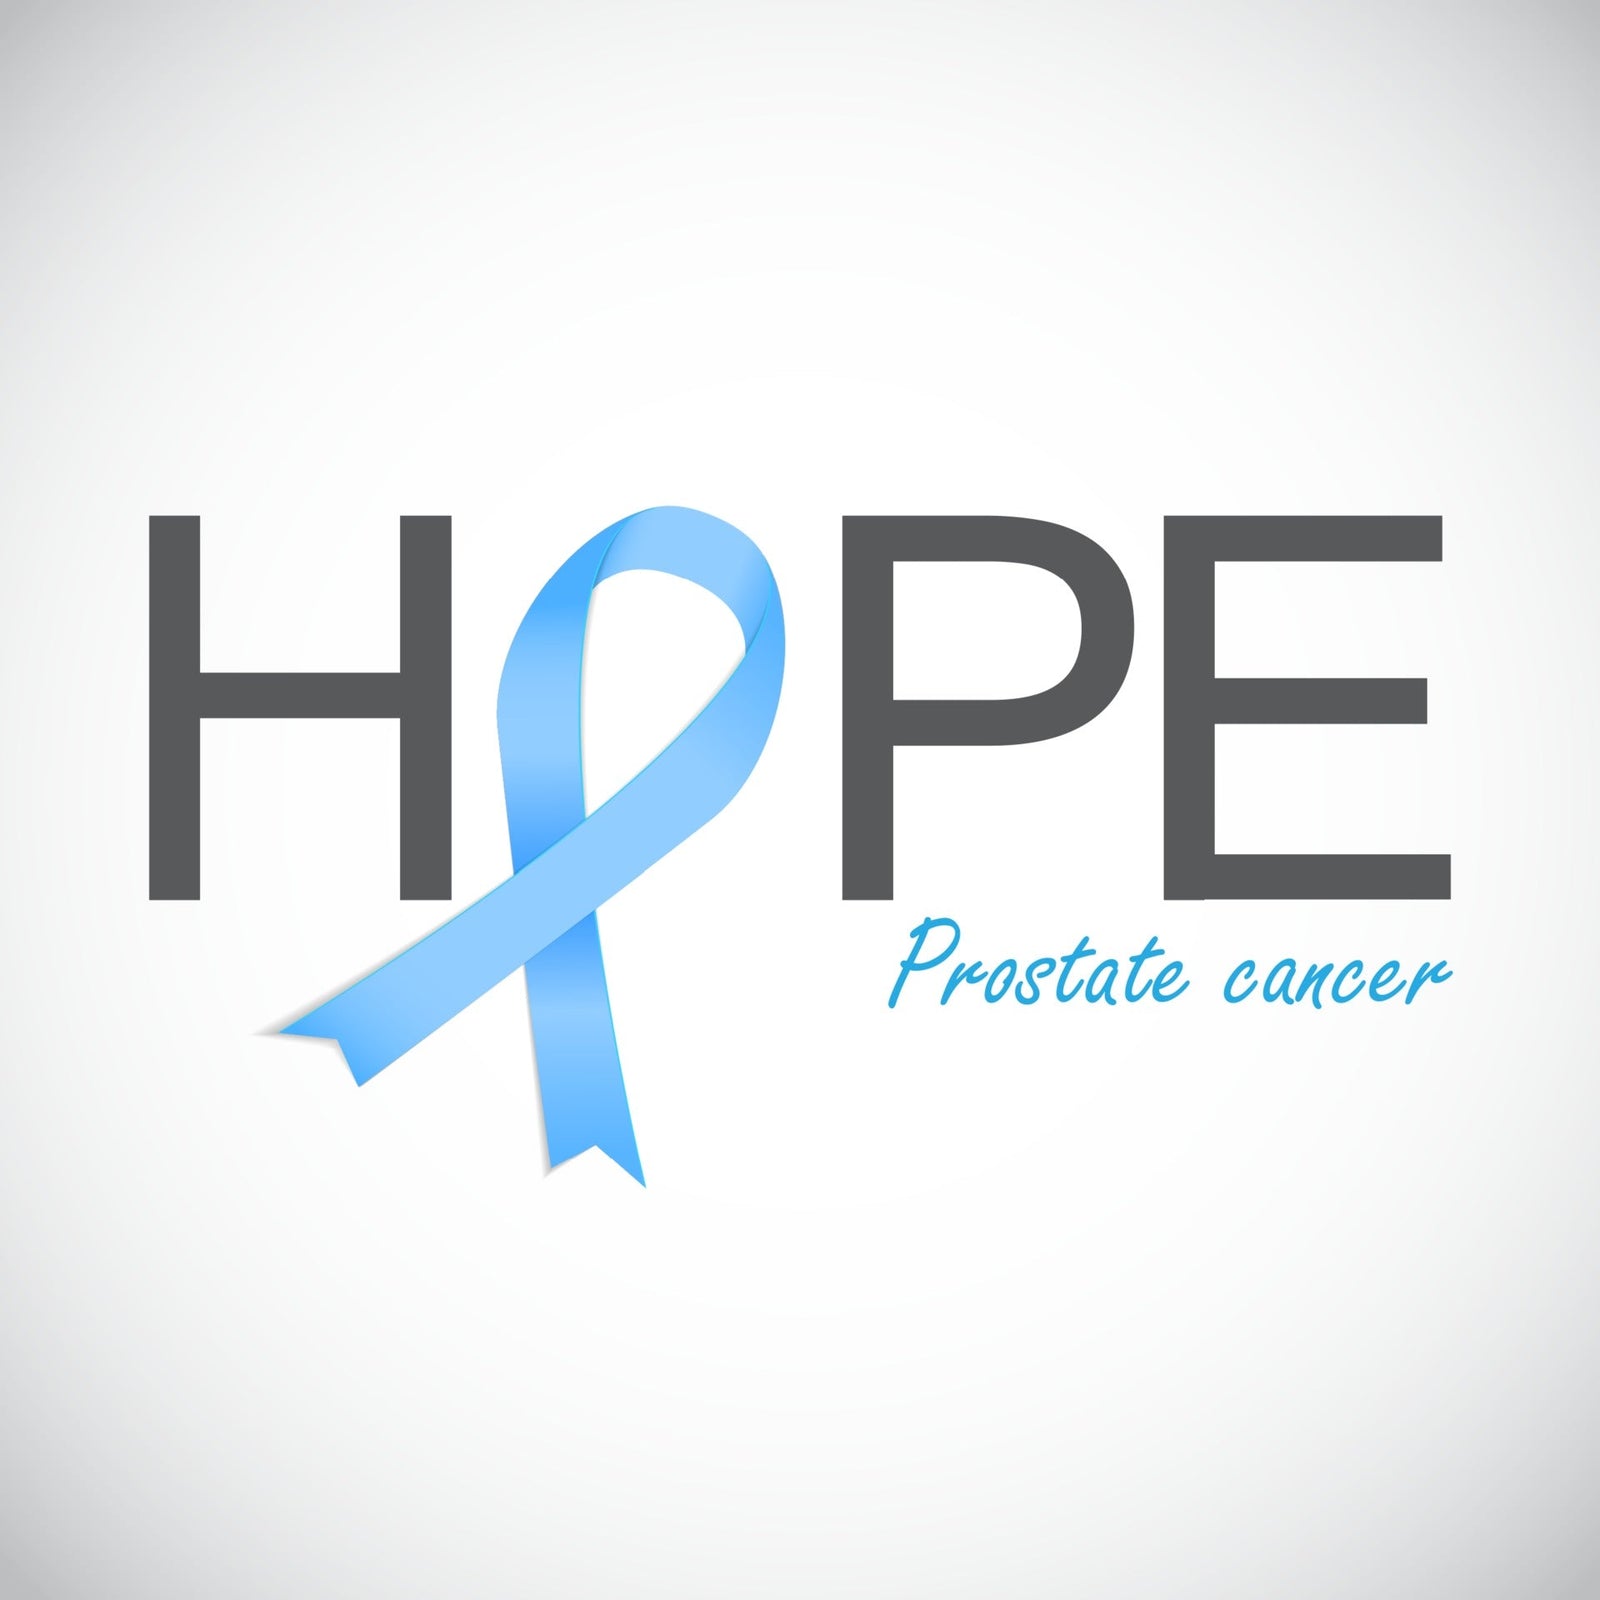 history of prostate cancer